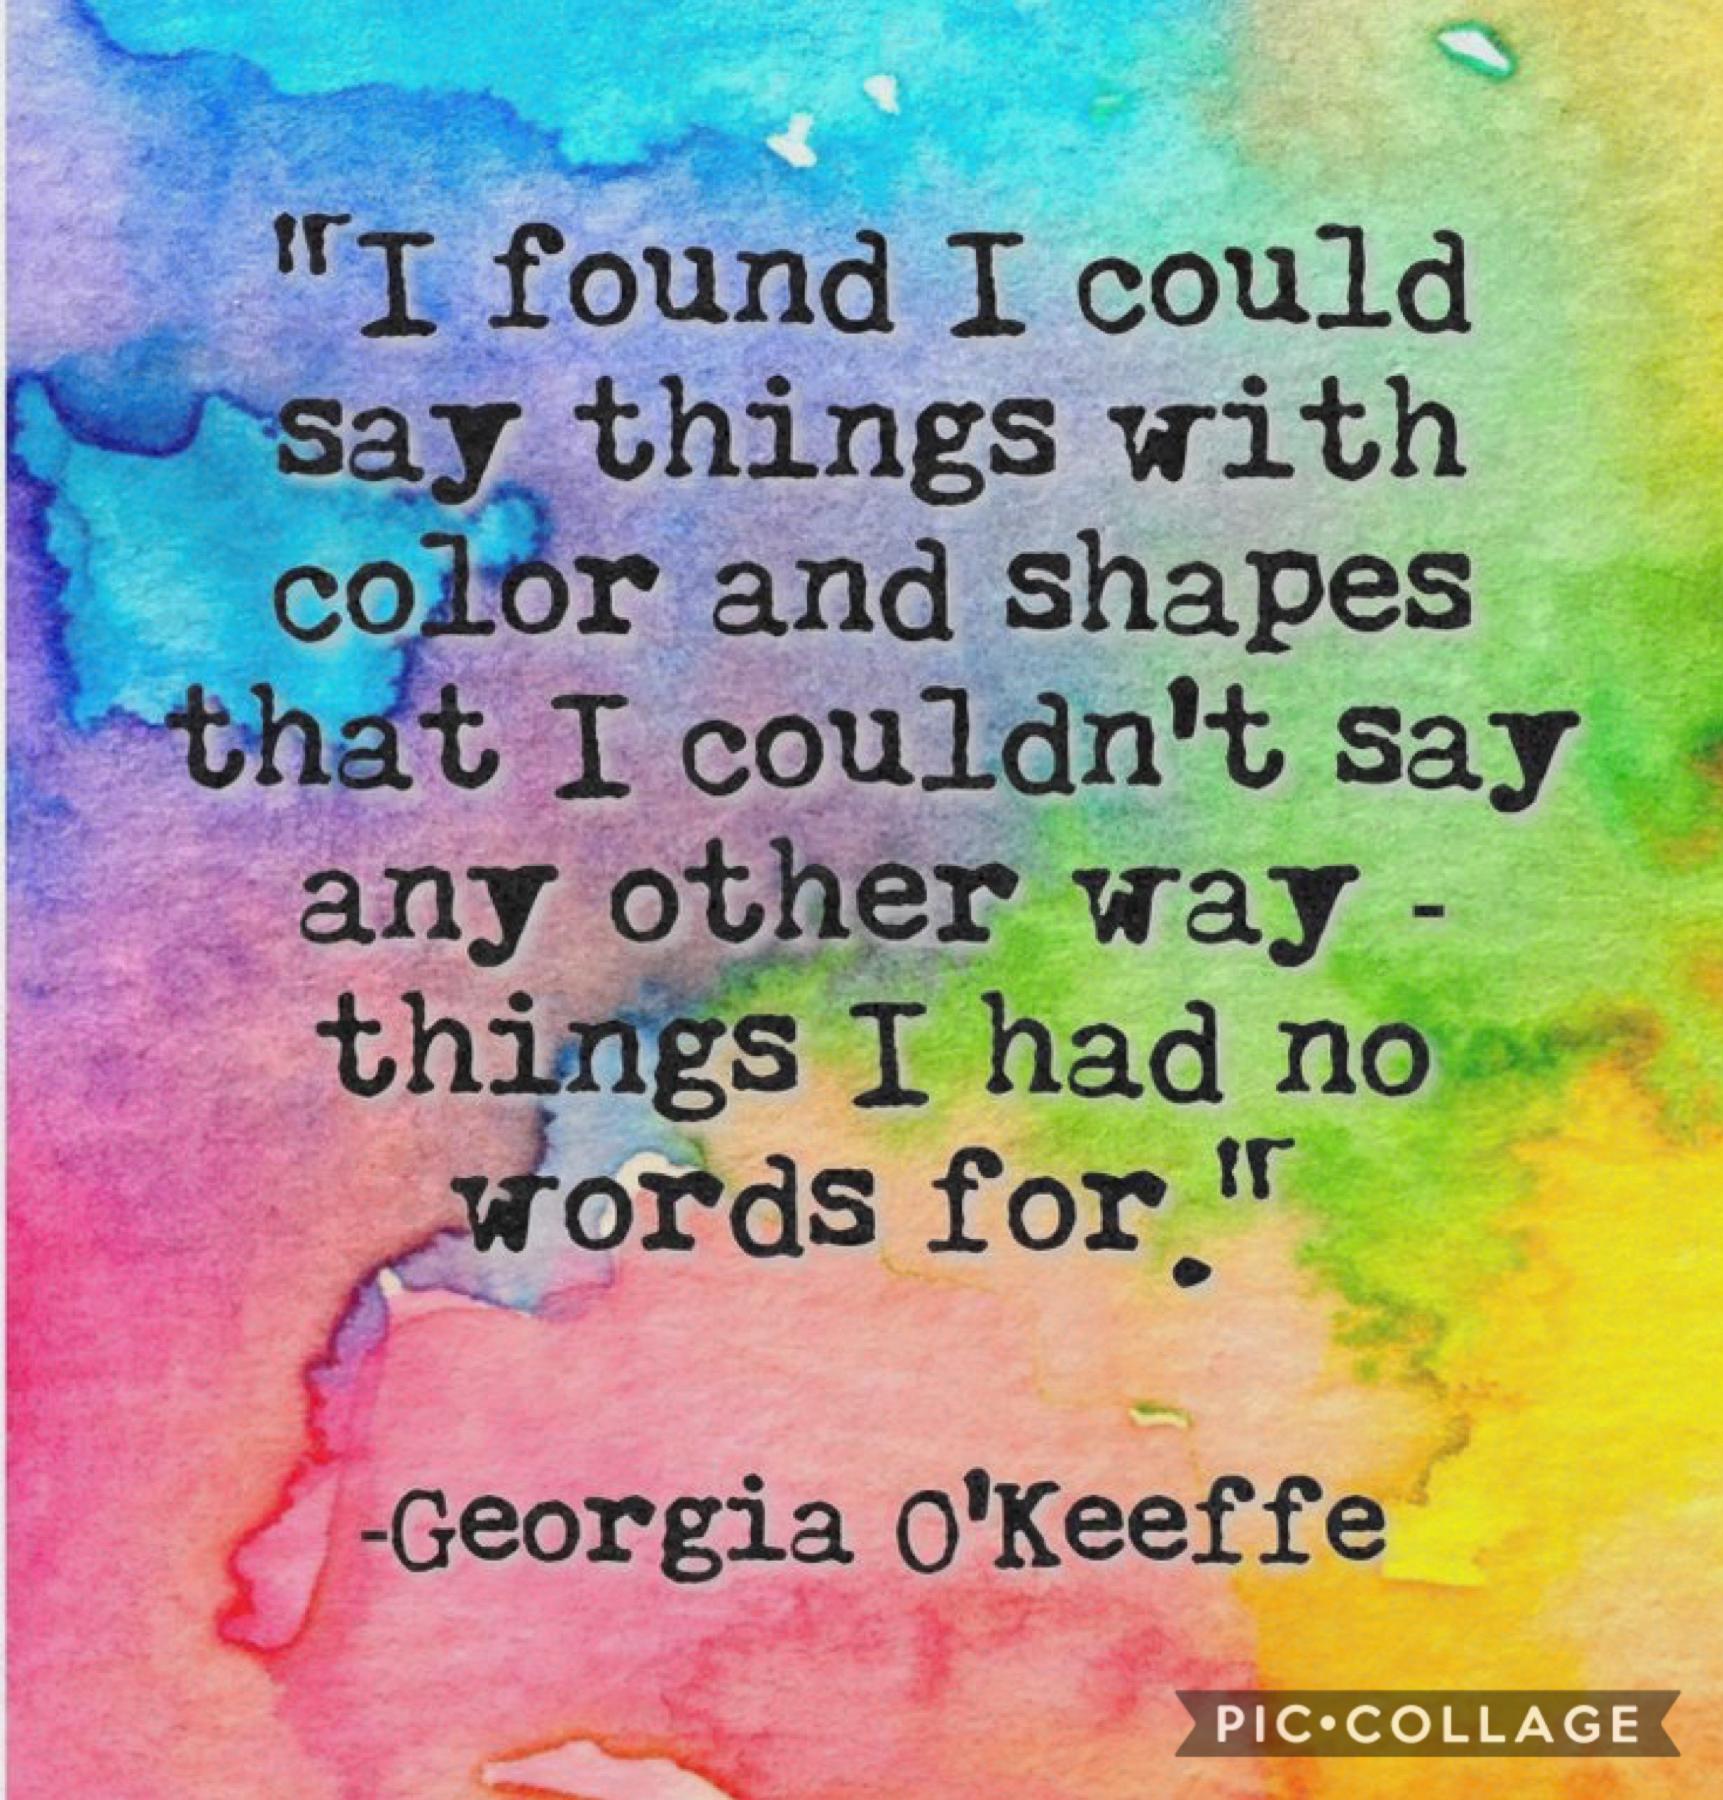 I found I could say things with colors 💙💚🧡💛💜